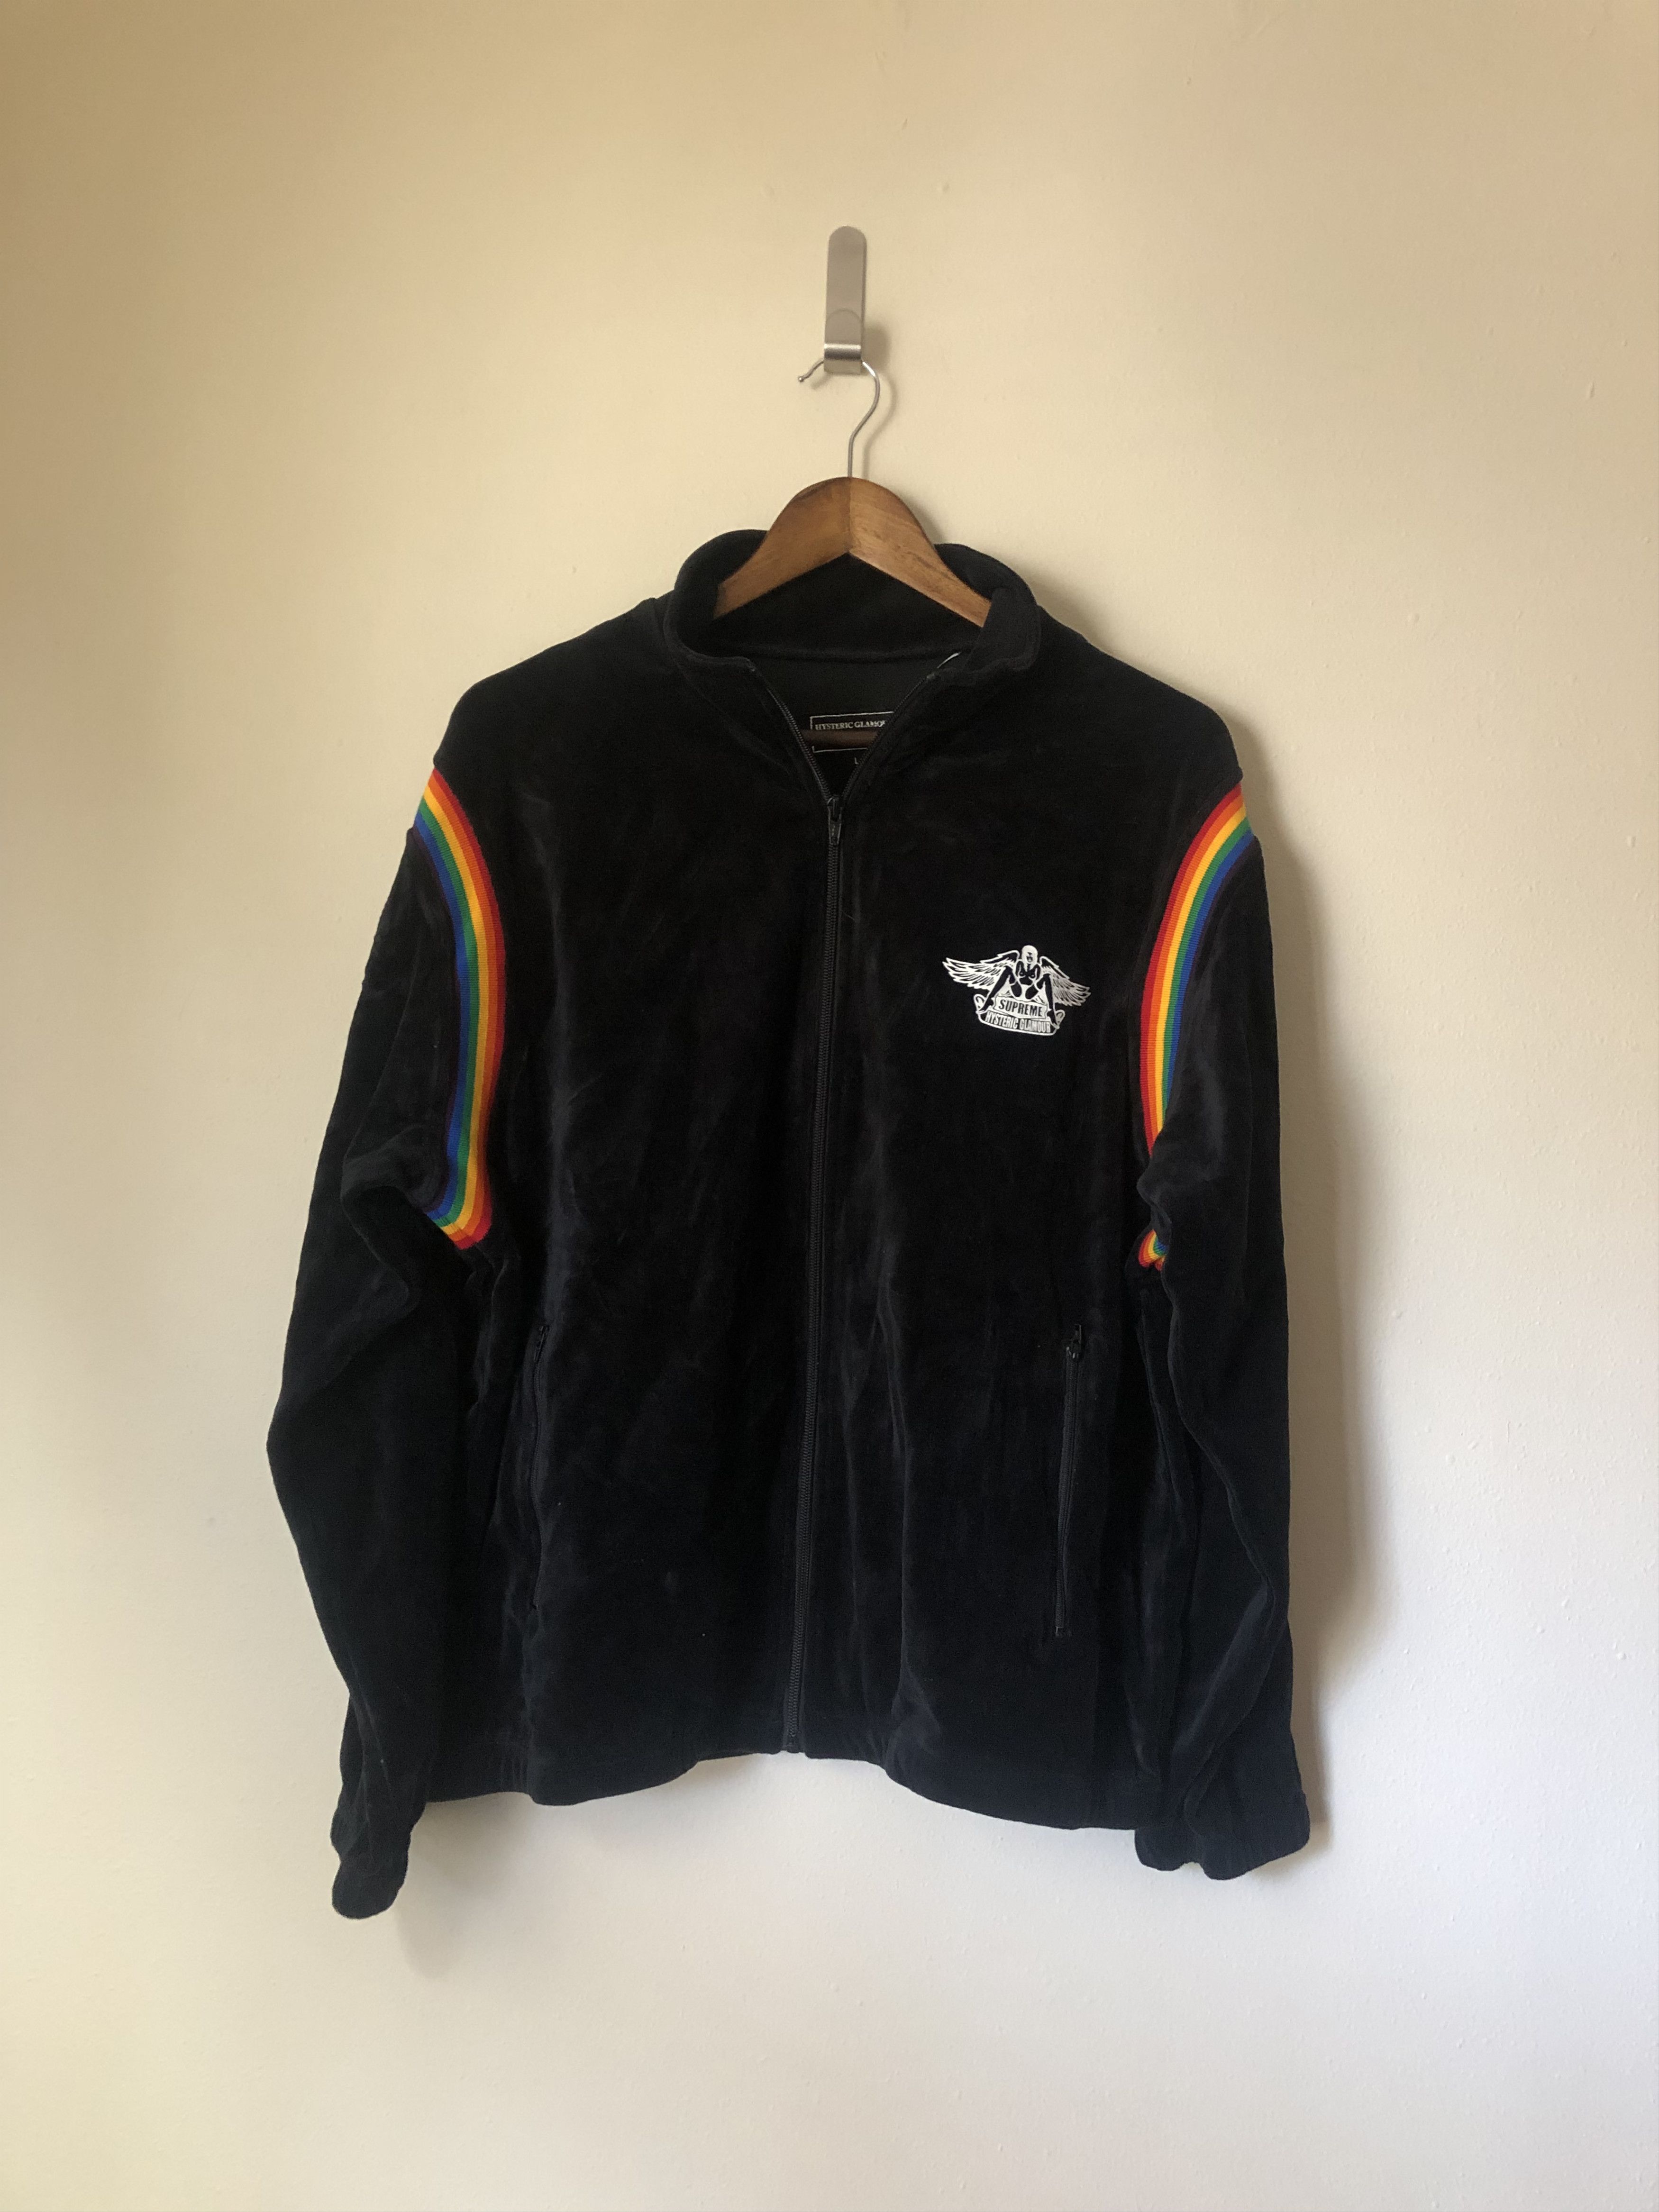 Hysteric Glamour Track Jacket | Grailed